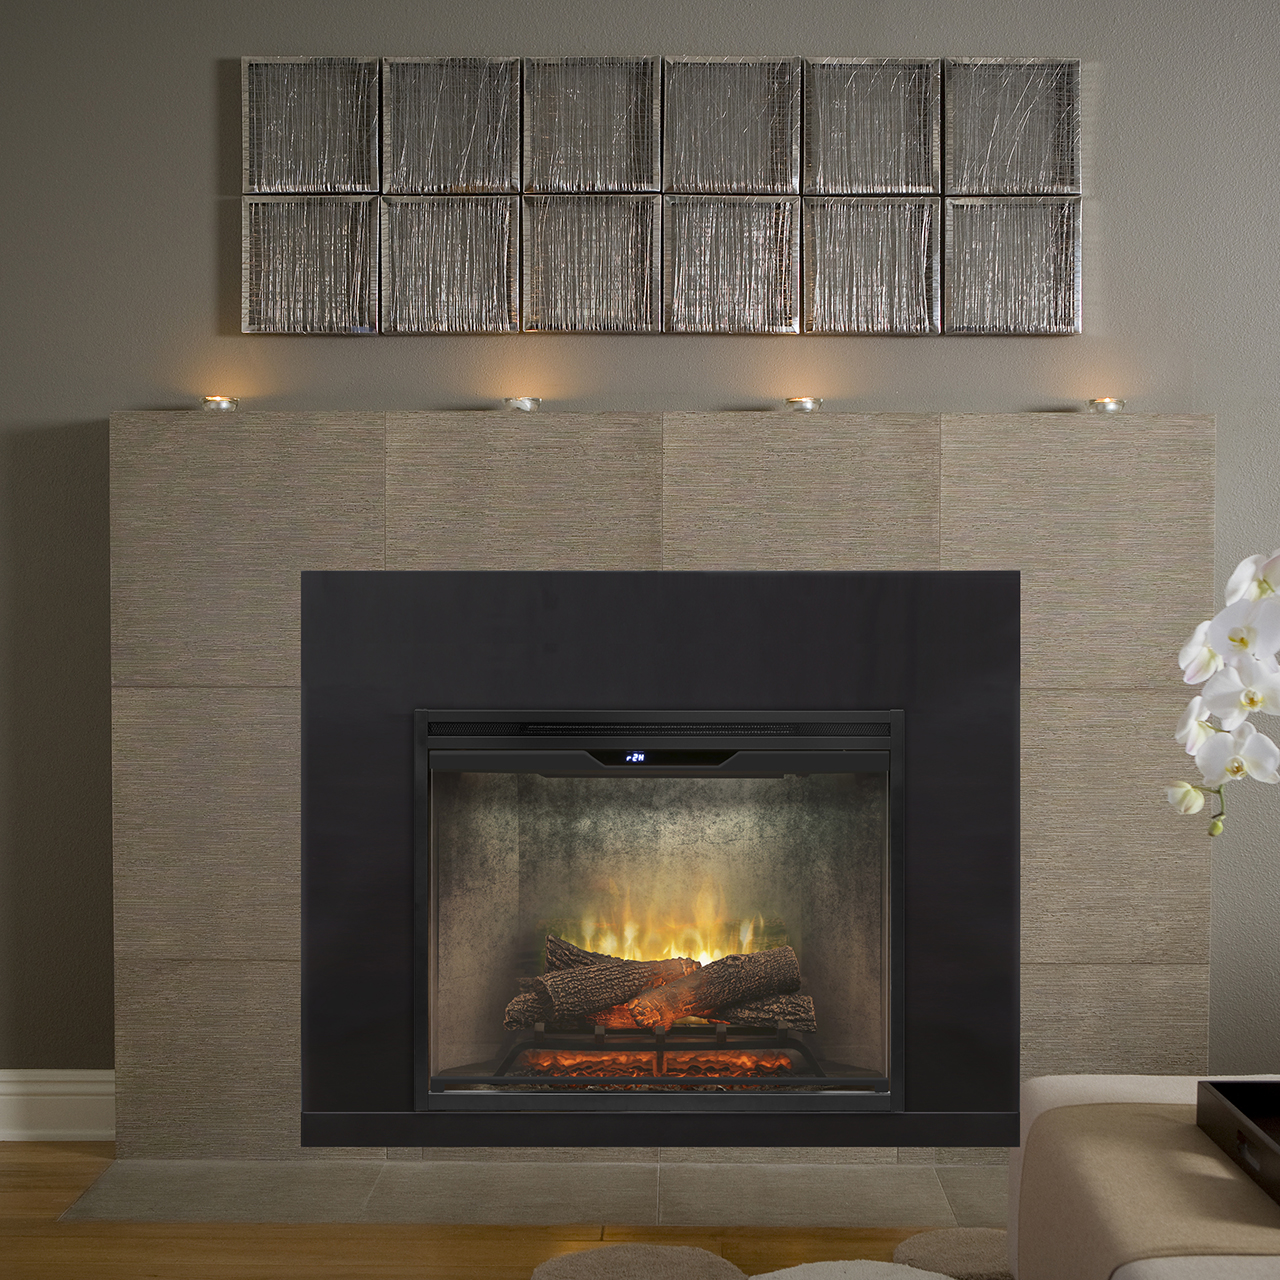 DIMPLEX RBF30WC REVILLUSION ELECTRIC FIREPLACE INSERT WEATHERED CONCRETE